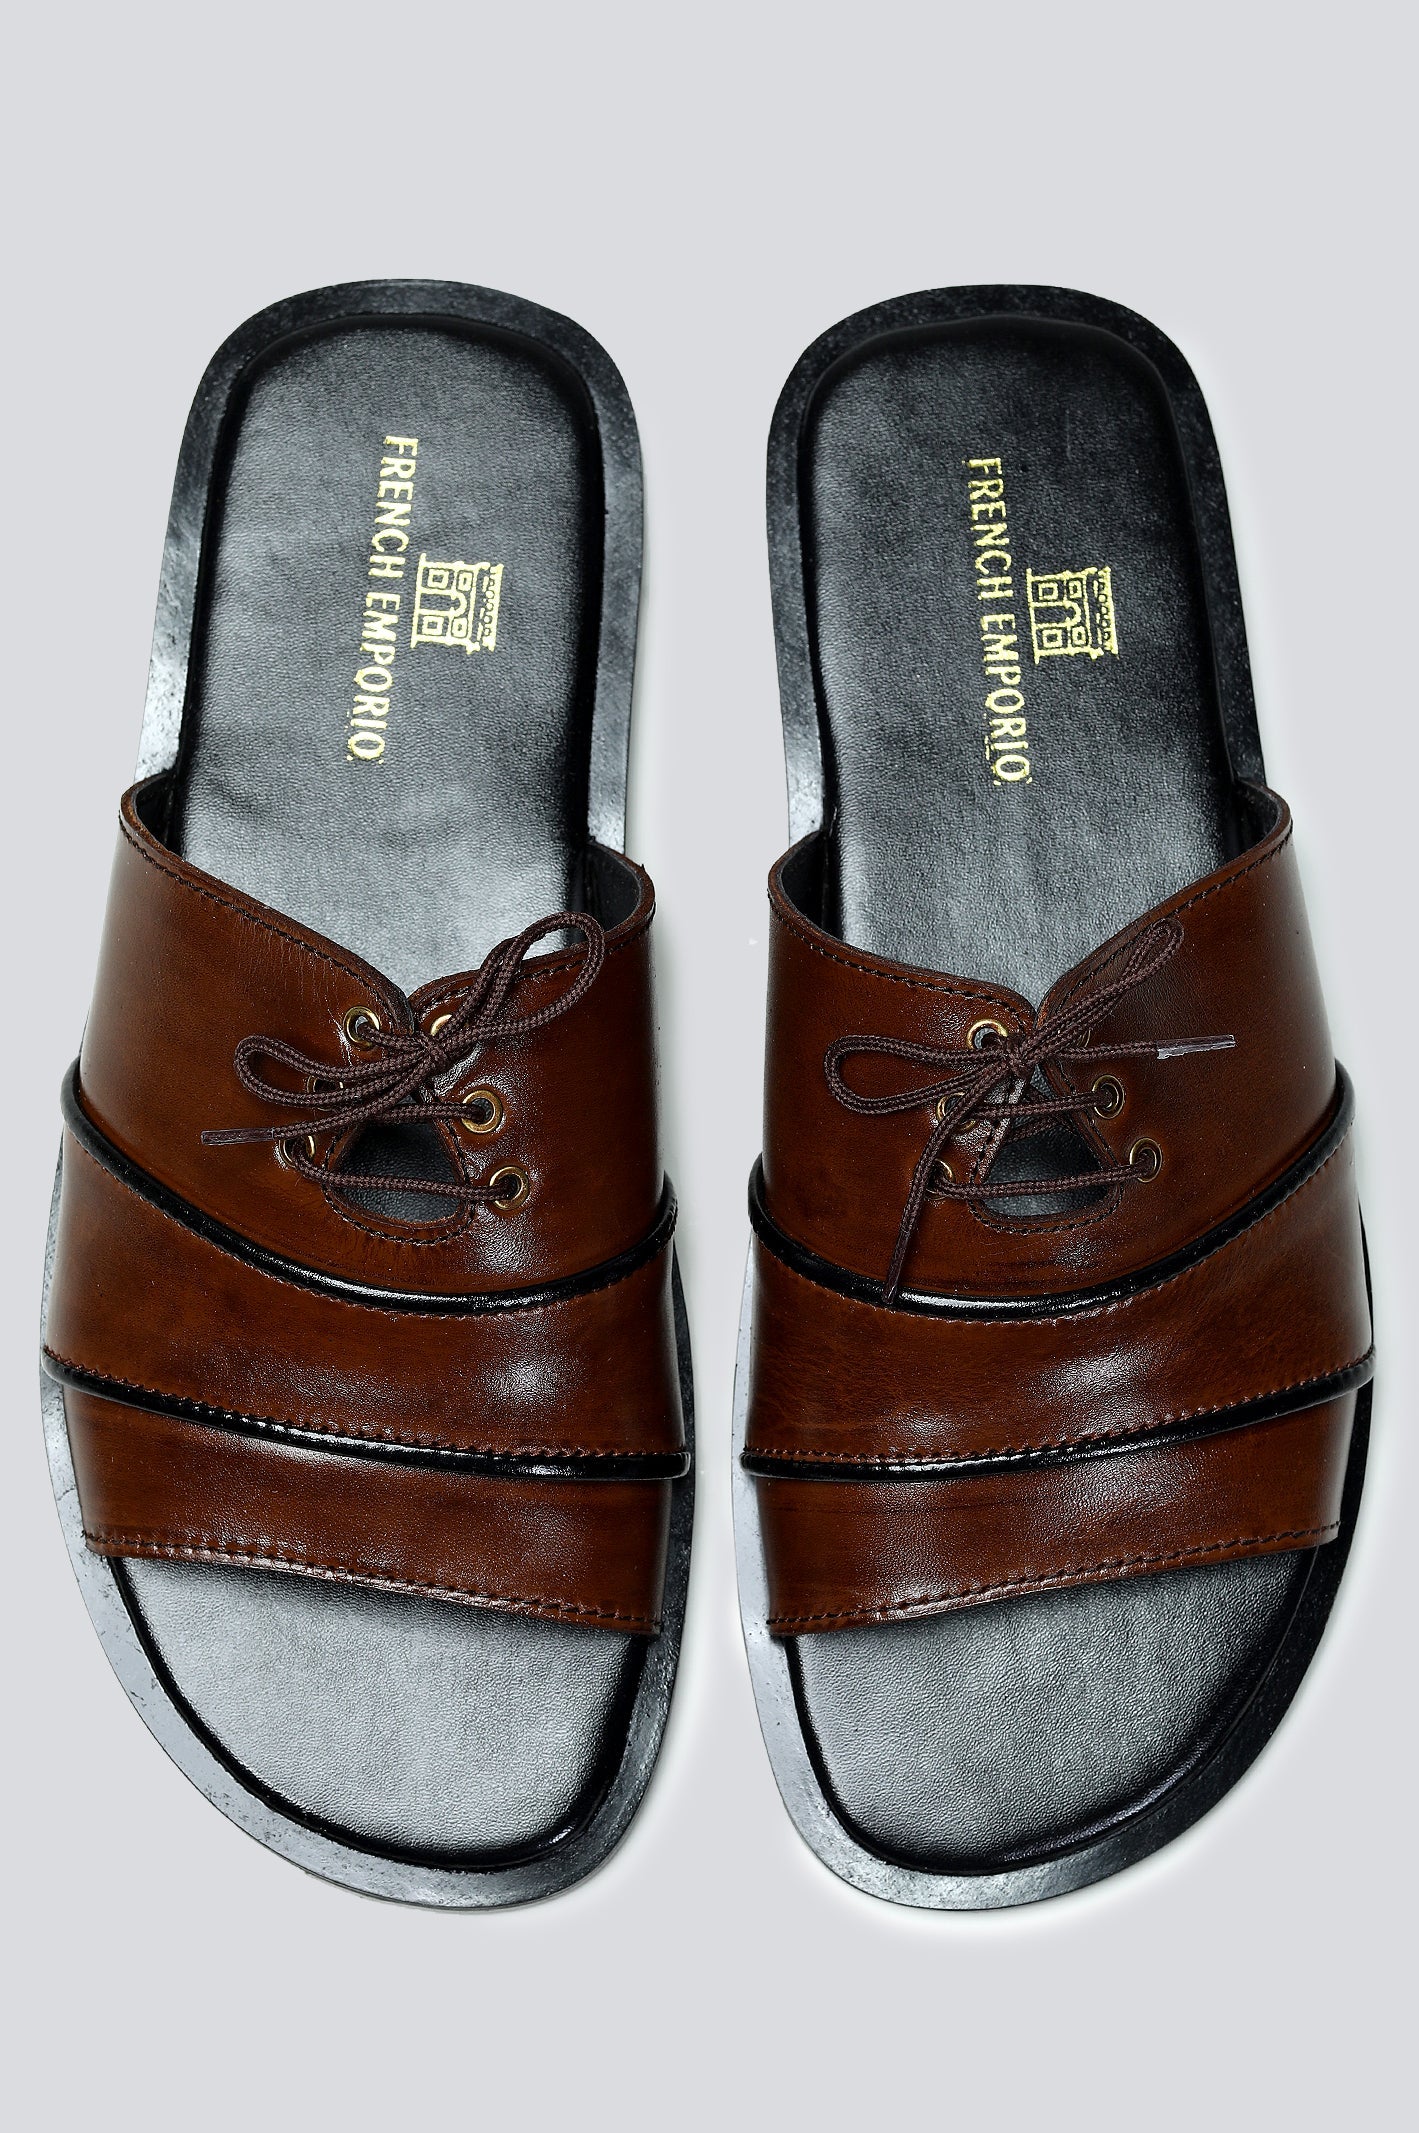 Slippers For Men - Diners